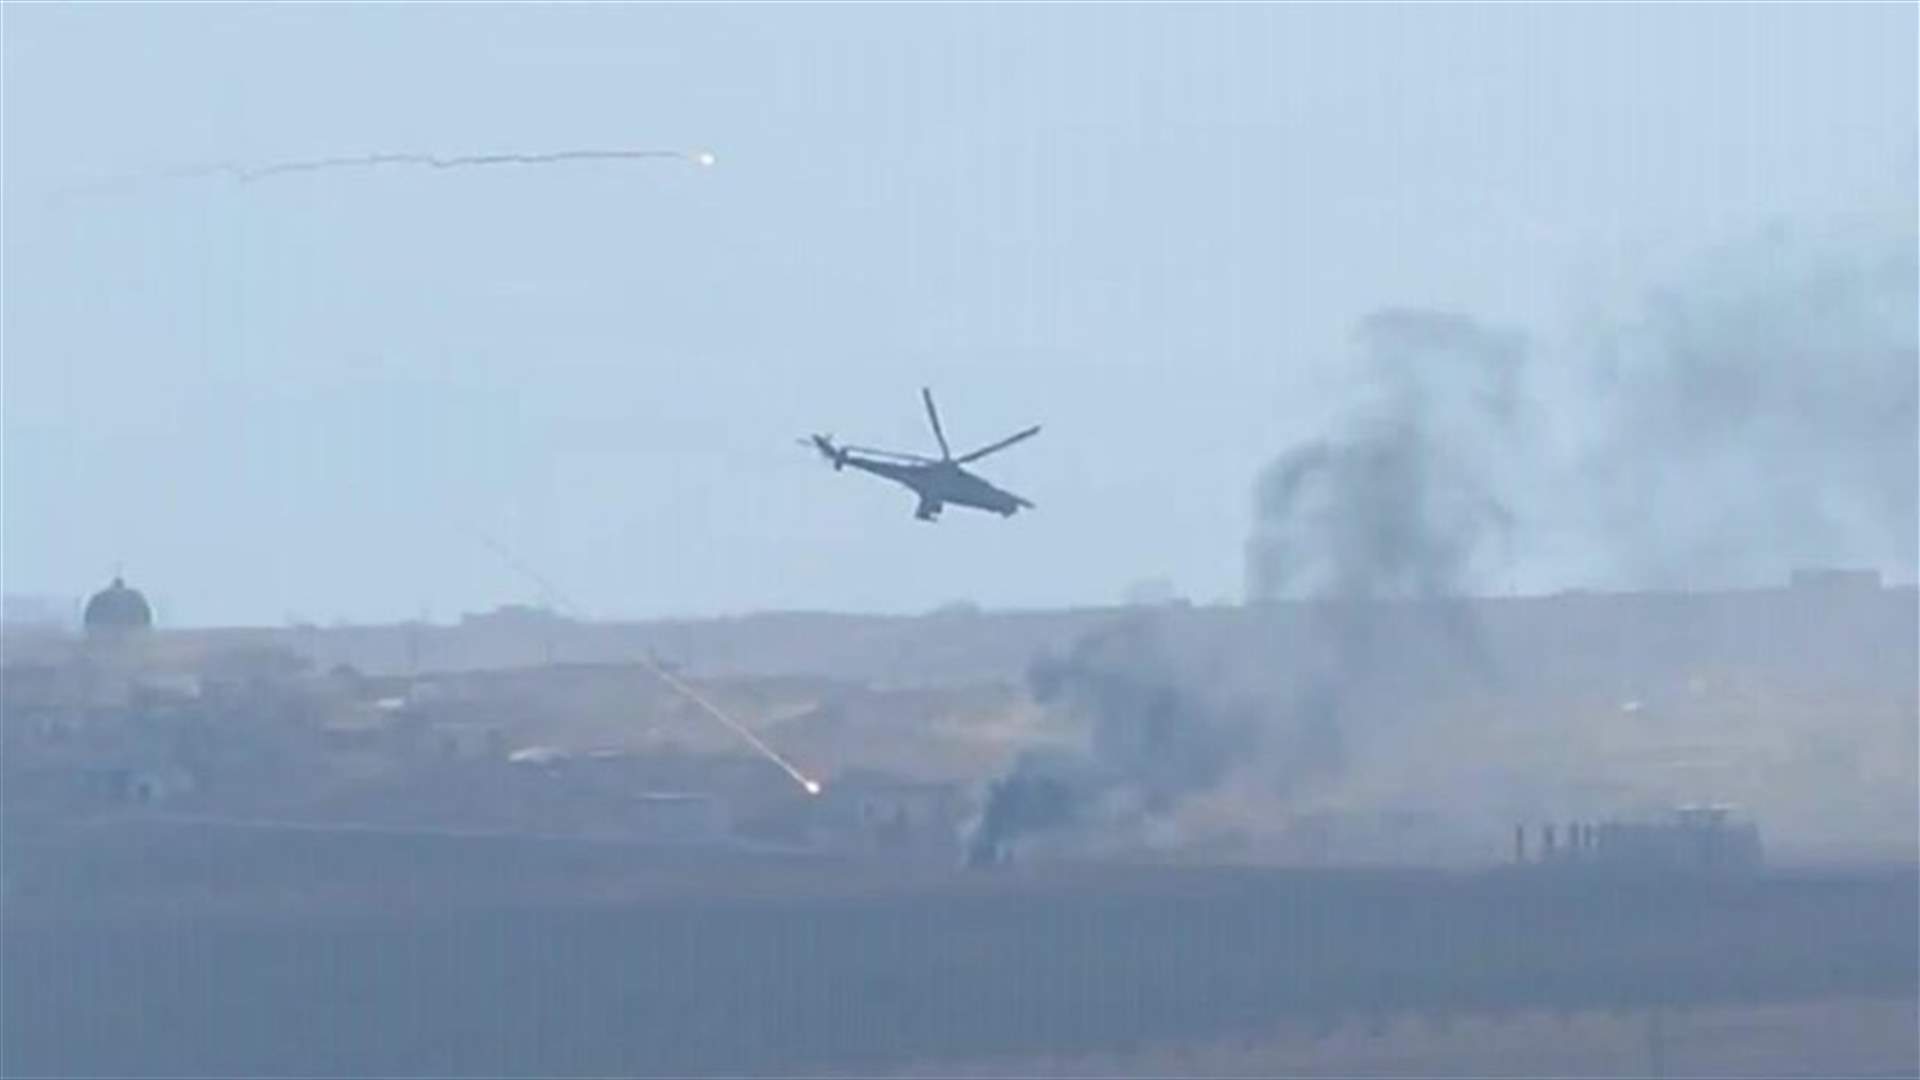 Syrian rebels destroy helicopter in Hama offensive-monitor, rebels